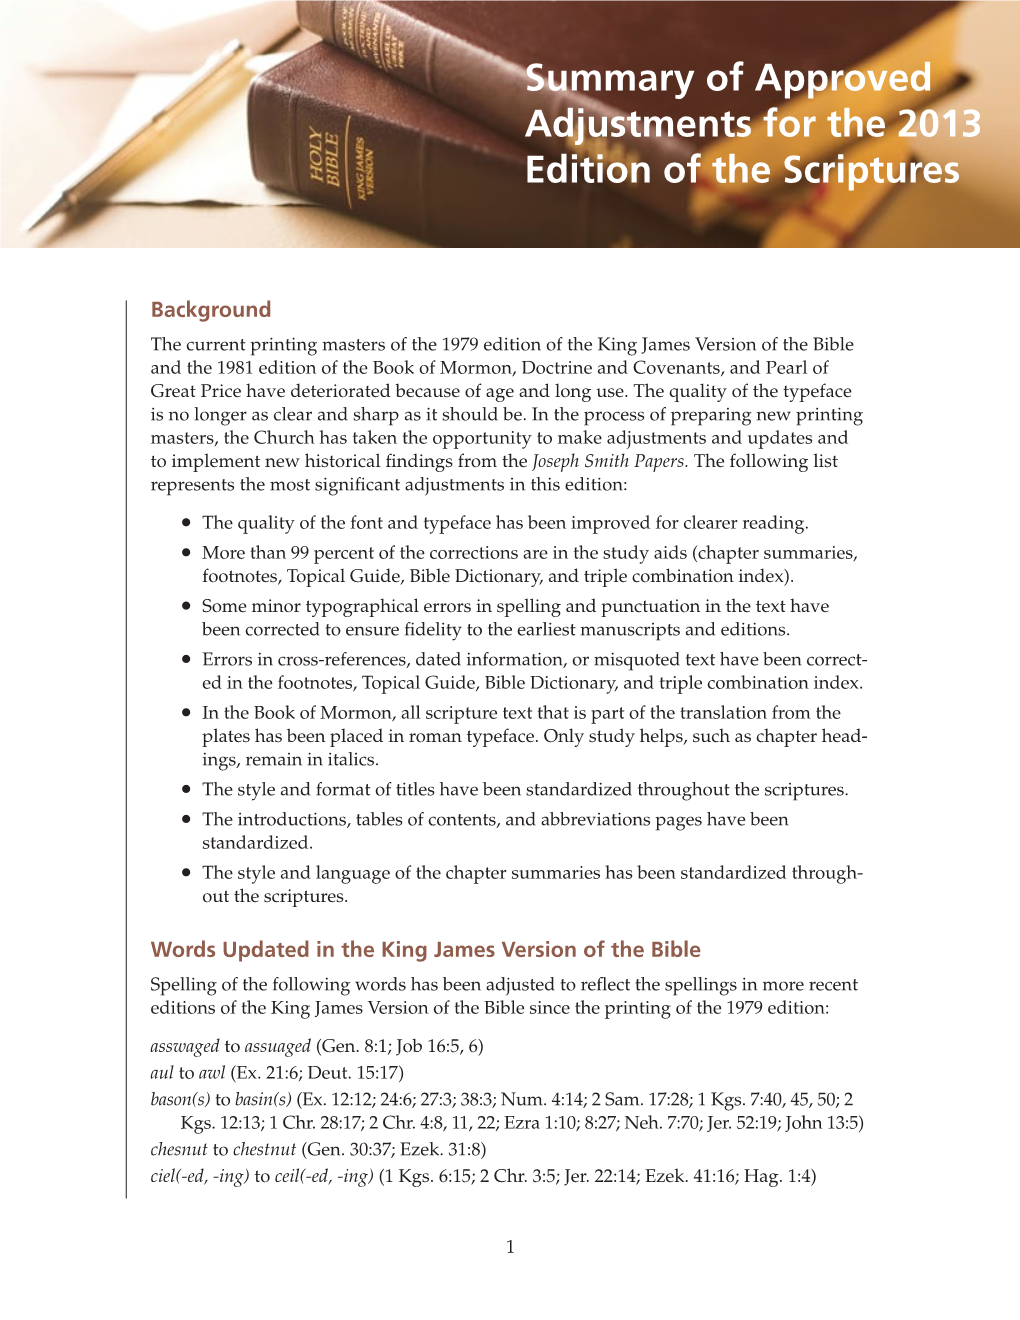 Summary of Approved Adjustments for the 2013 Edition of the Scriptures